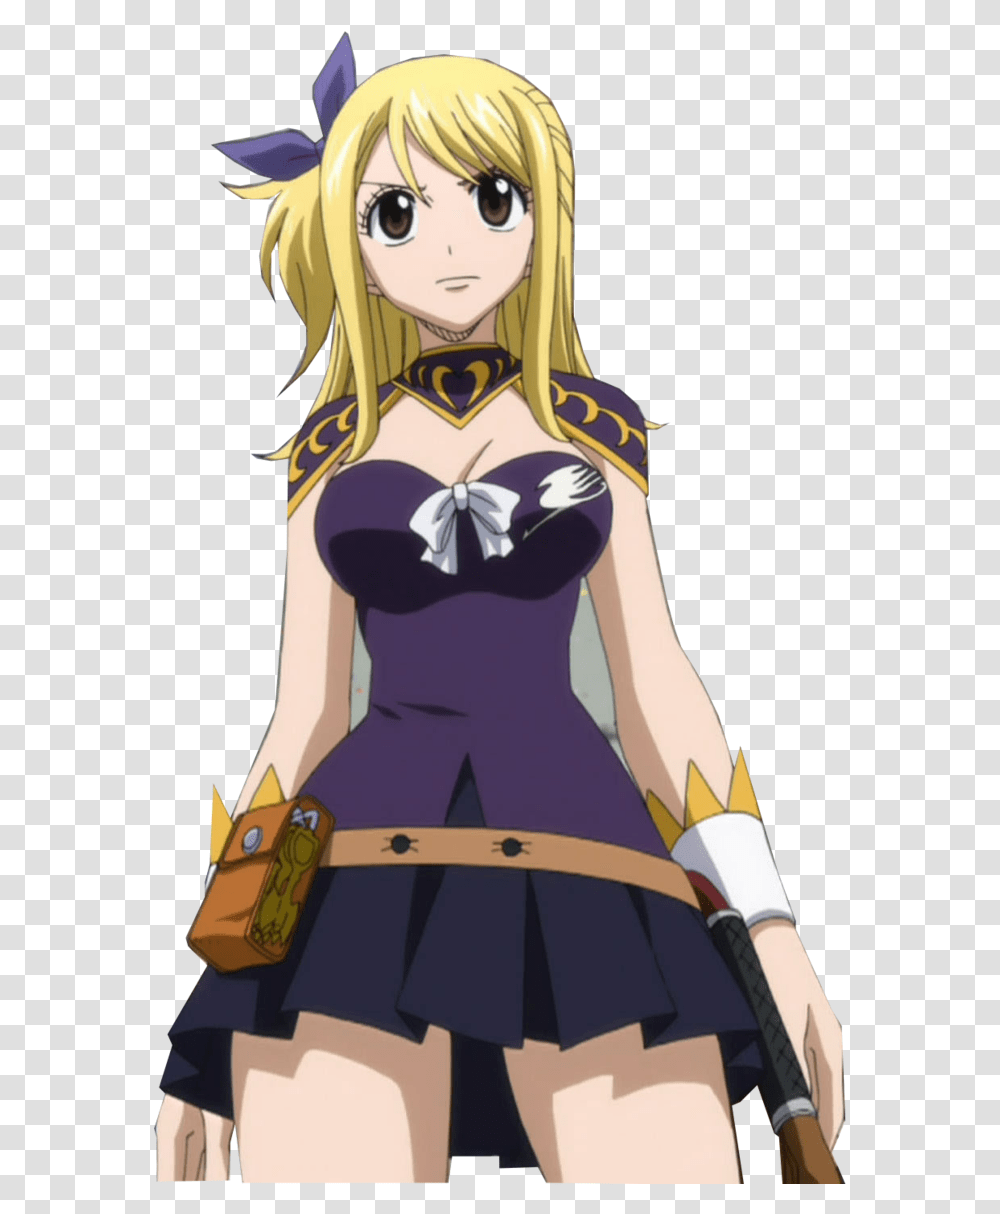 Fairy Tail Lucy 6 Image Lucy Anime Fairy Tail, Comics, Book, Manga, Clothing Transparent Png